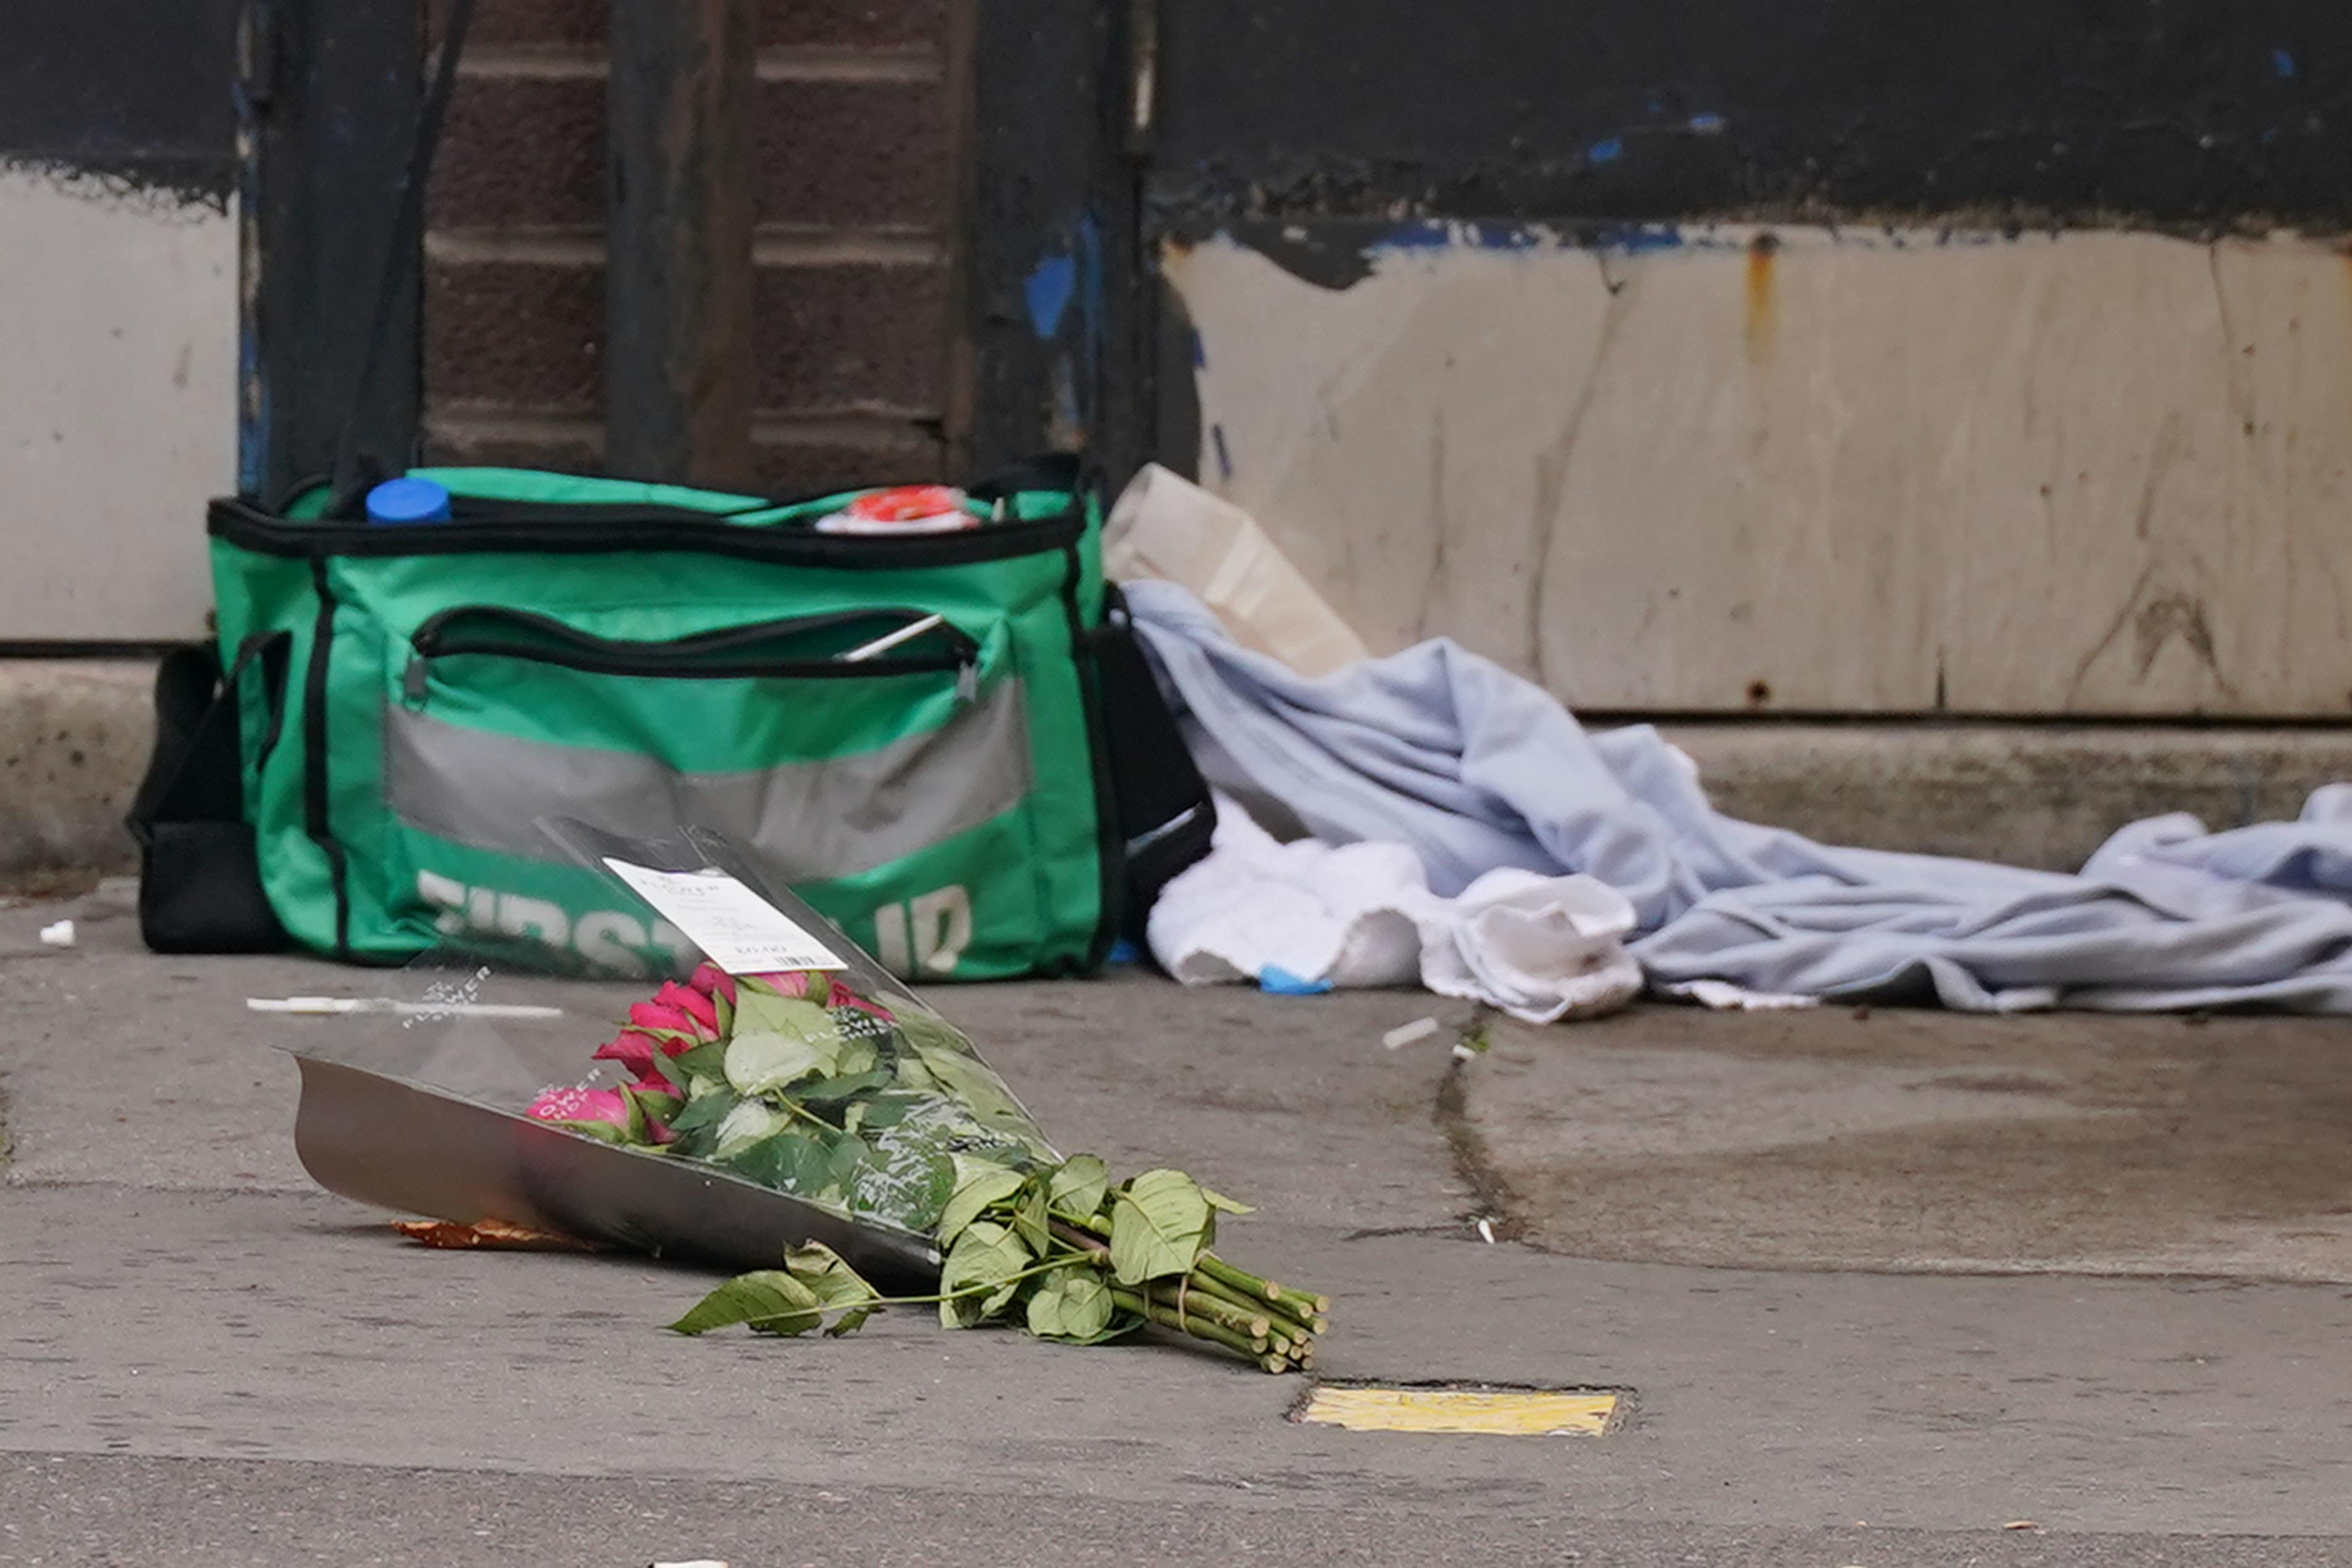 Flowers at the scene near the Whitgift shopping centre in Croydon